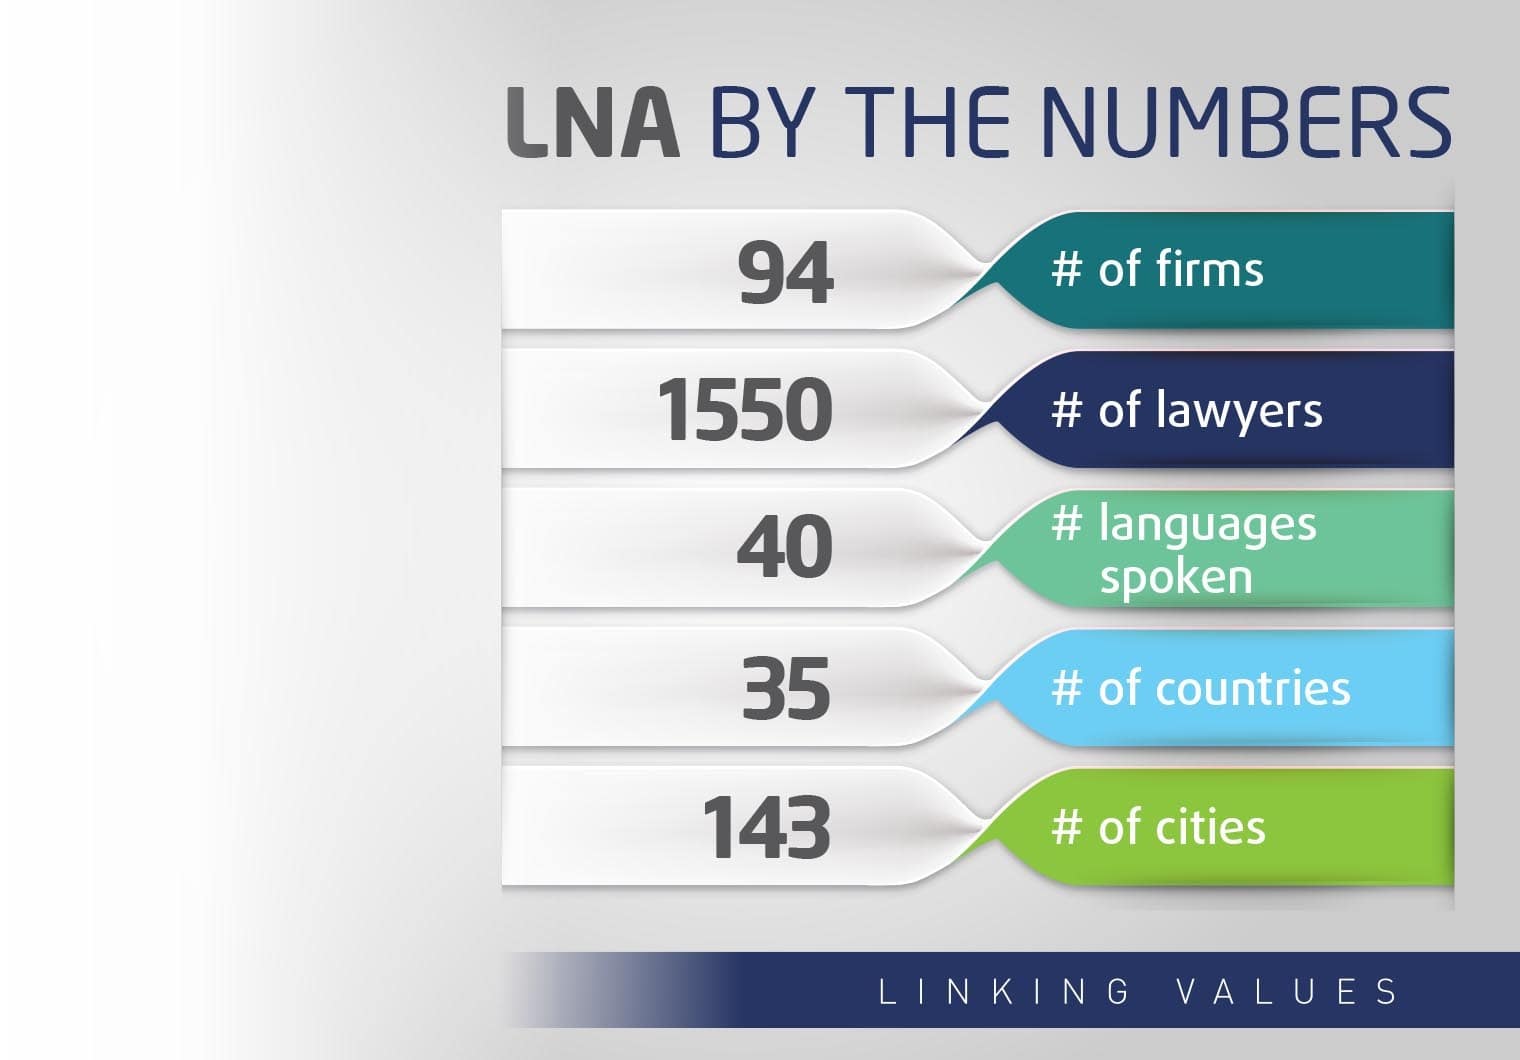 LNA by the numbers: 94 firms, 1550 layers, 40 languages spoken, 35 countries, 143 cities. Linking values